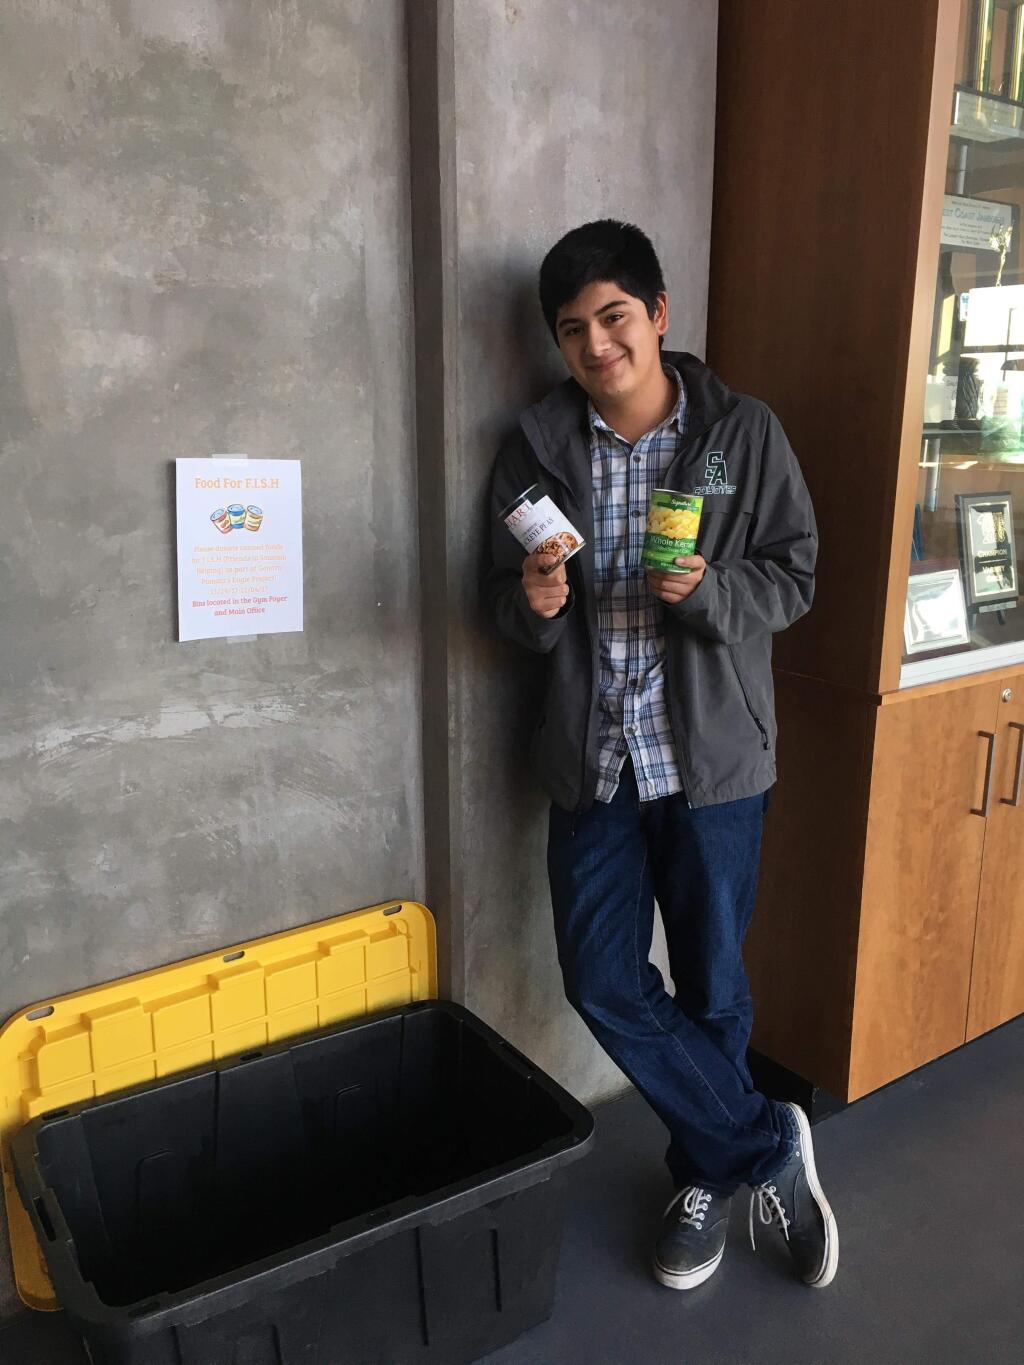 Genaro Pamatz in front of one of his collection bins at Sonoma Academy.